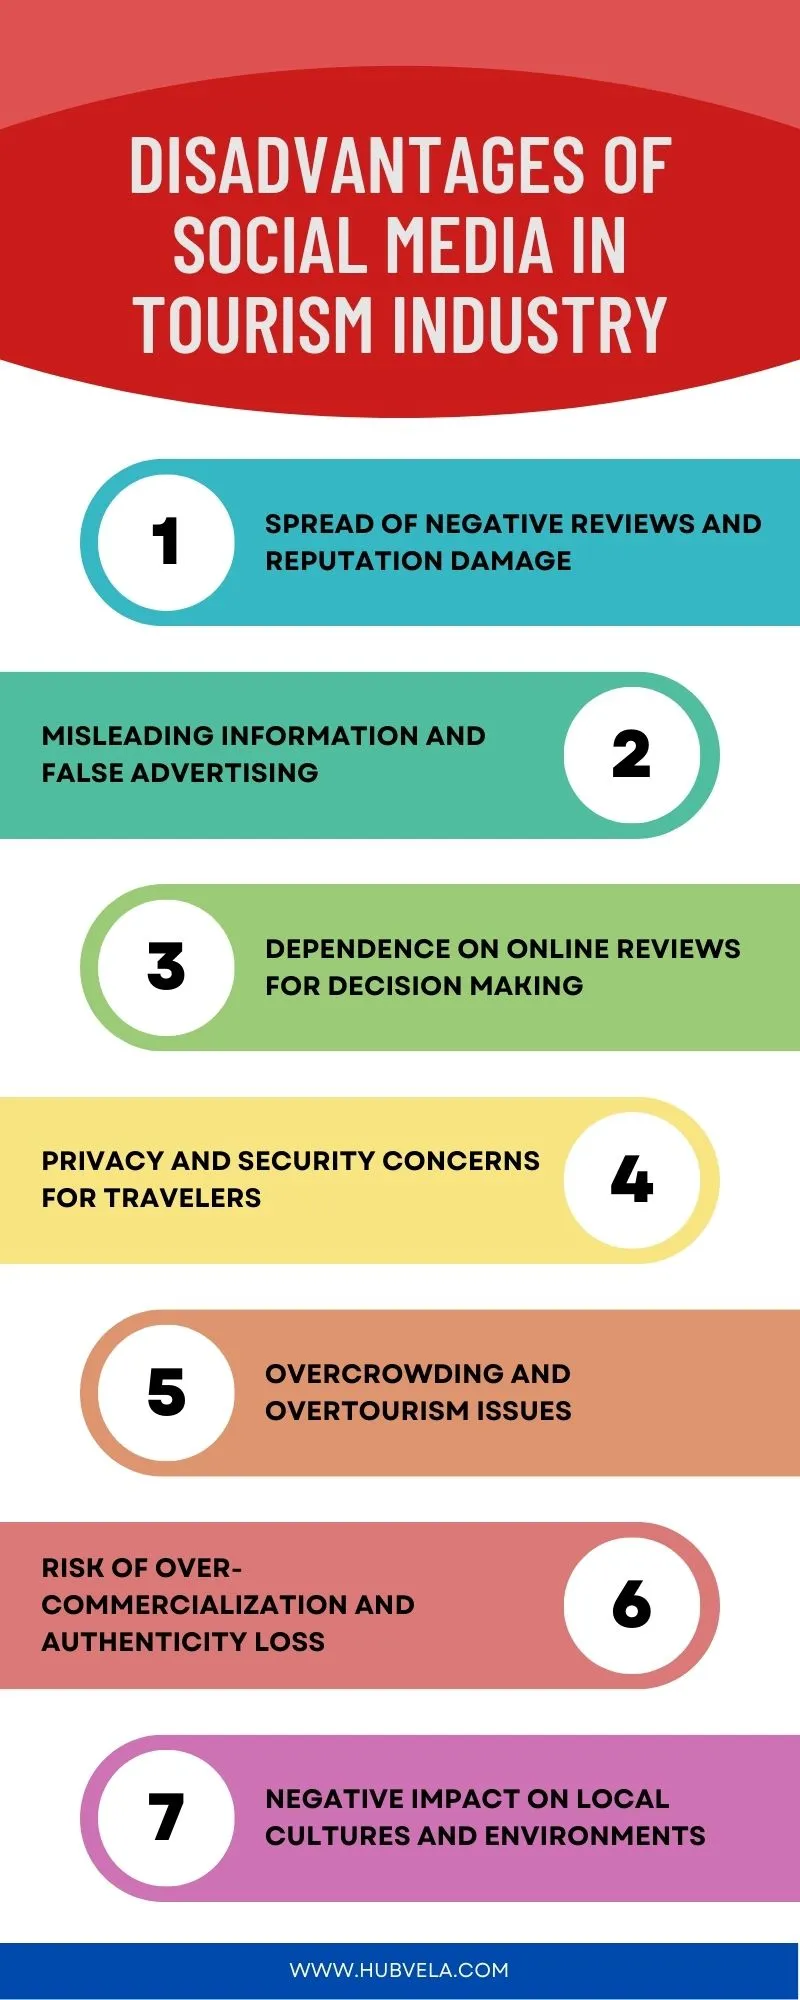 Disadvantages of Social Media in Tourism industry infographic